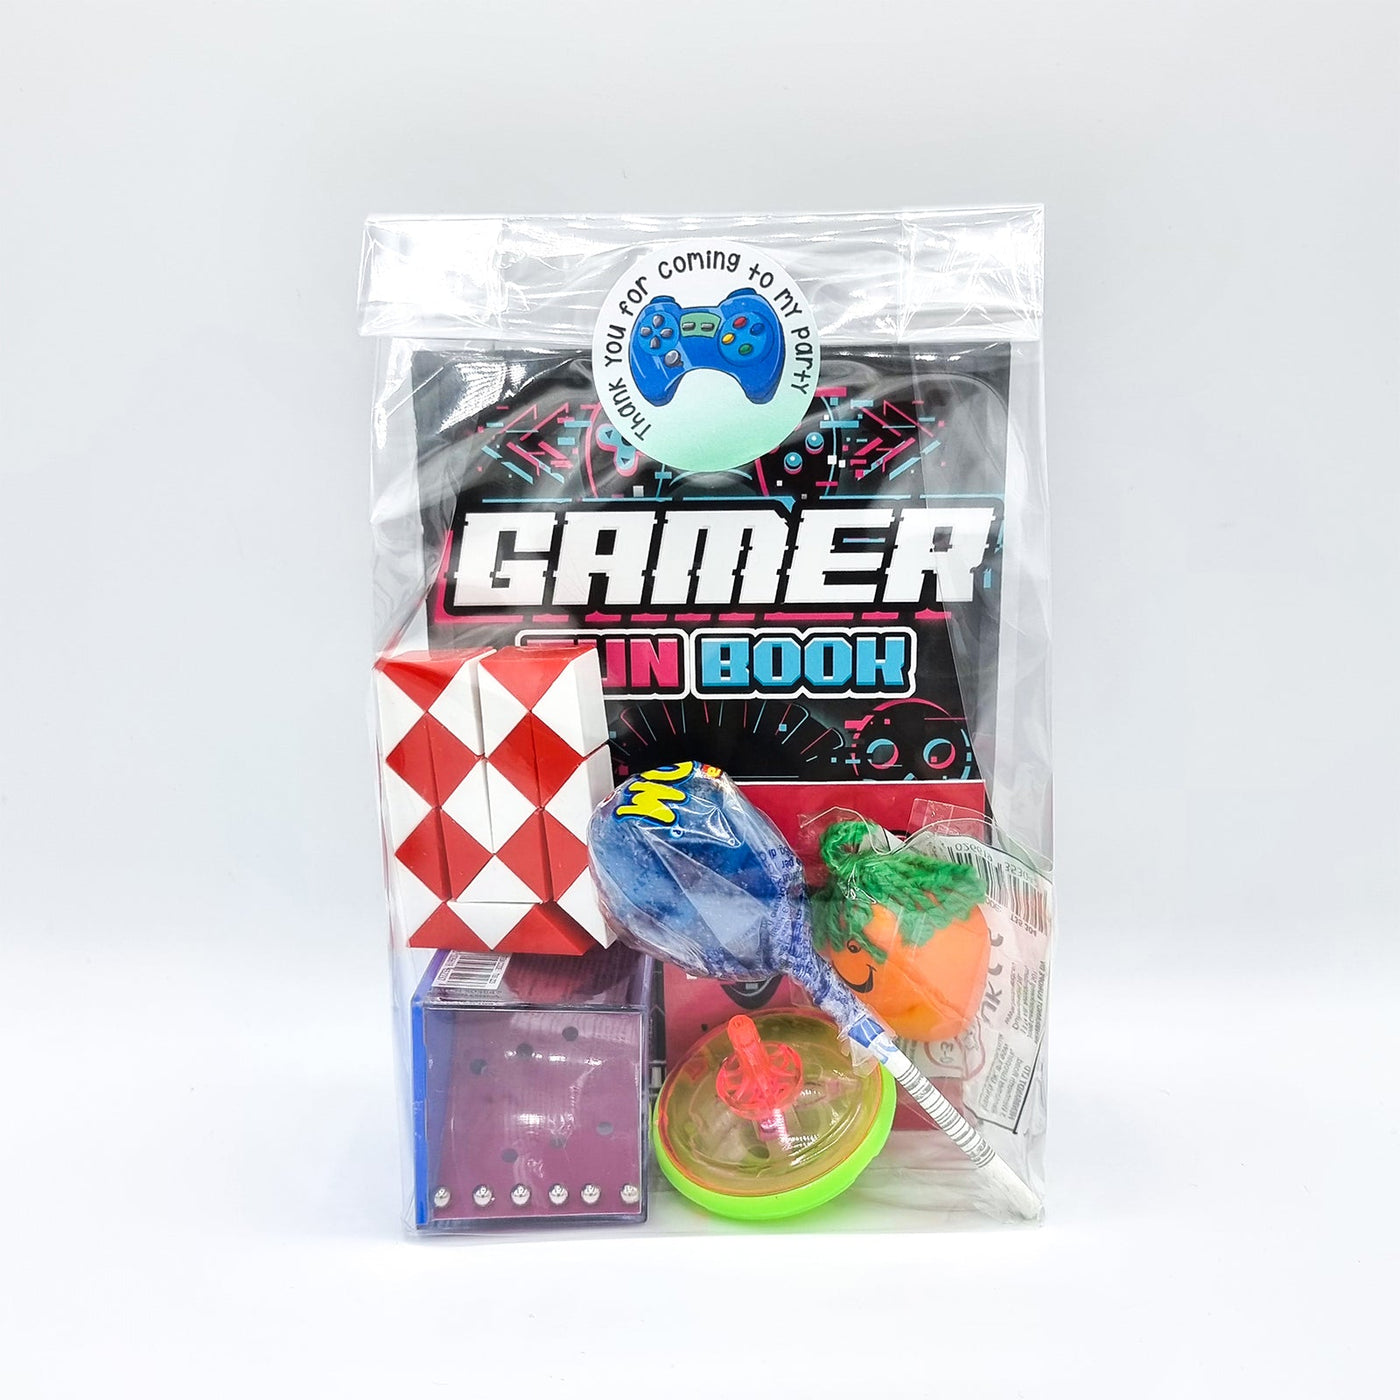 Children Birthday Gamer Pre Filled Goody Bags With Toys And Sweets. Party Favours For Boys And Girls.